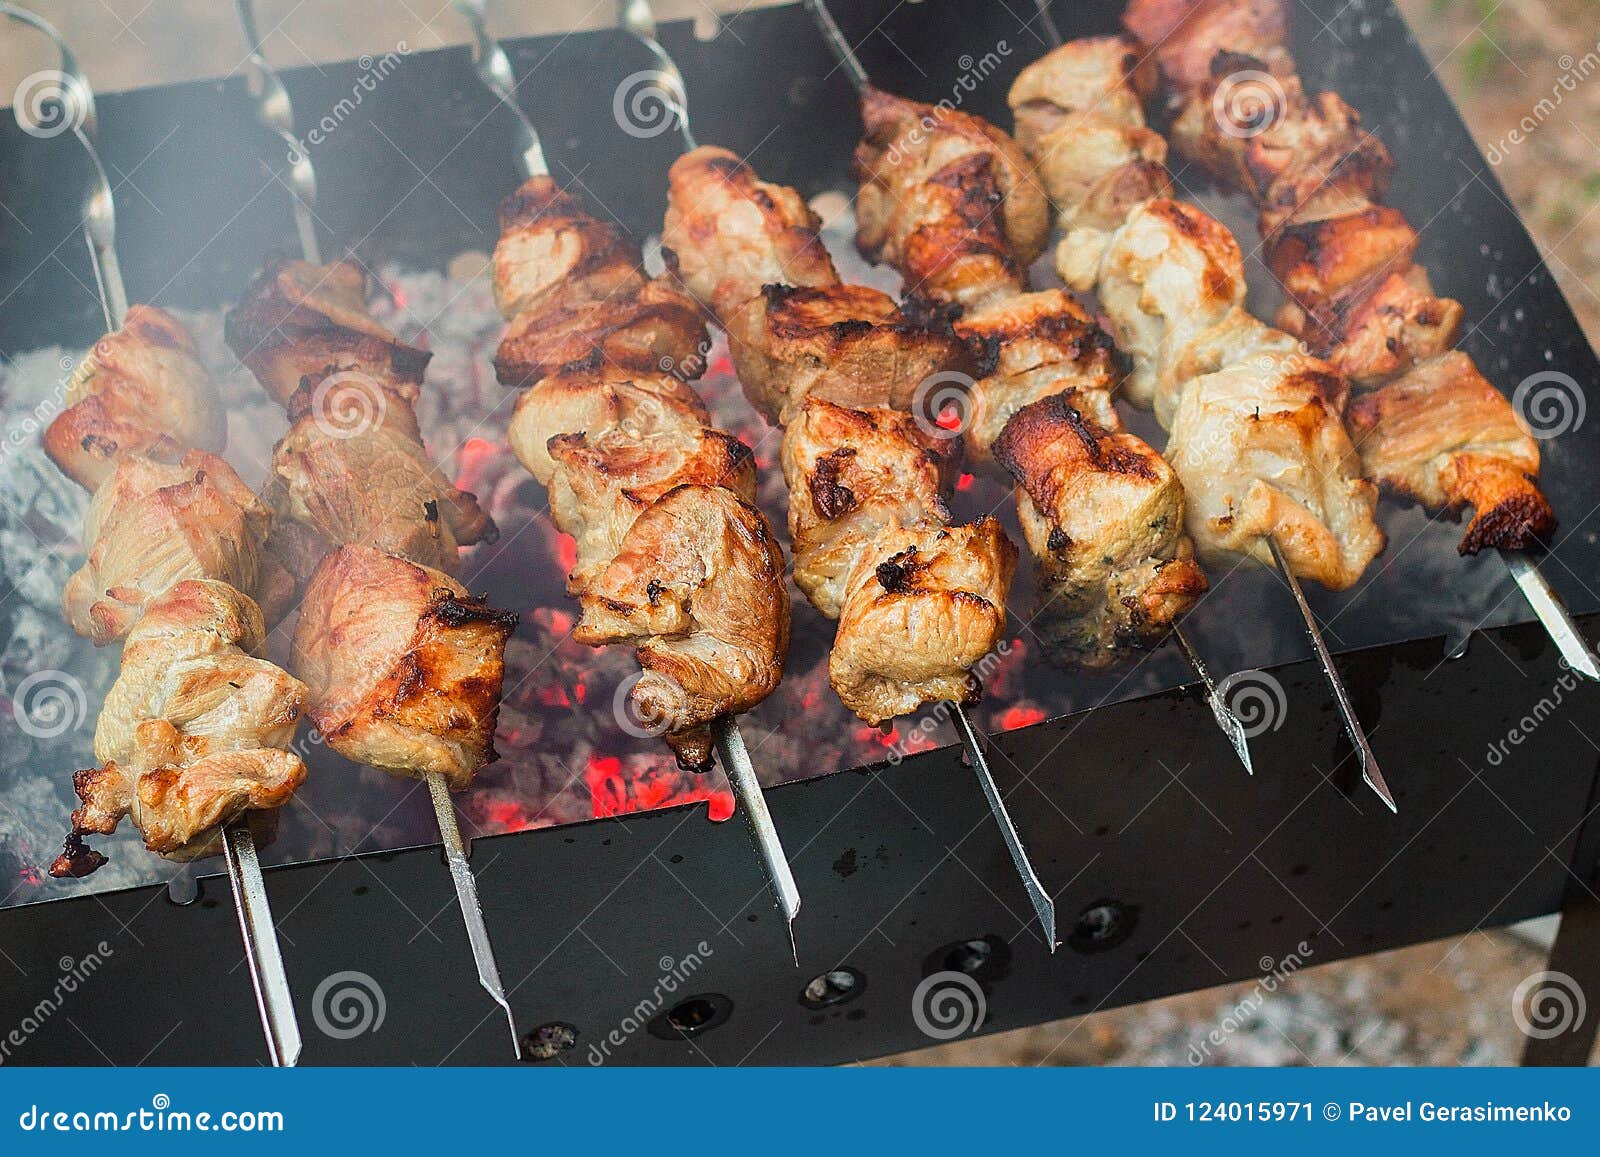 Traditional Barbecue on Mangal Stock Image - Image of food, chunks ...